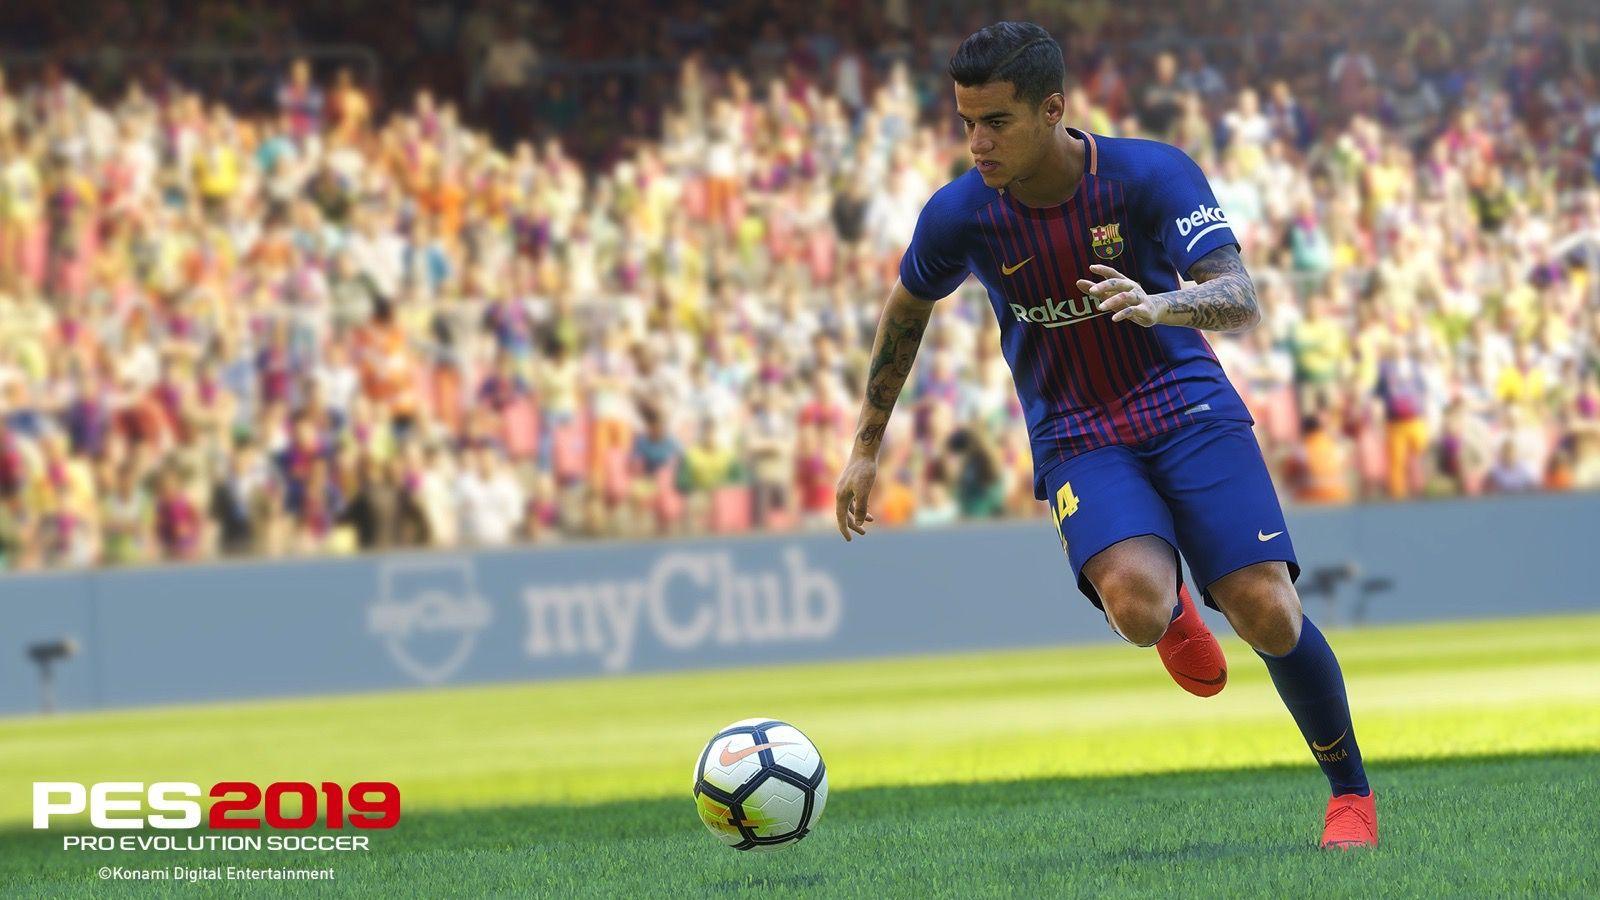 EA can't buy what makes 'PES' great